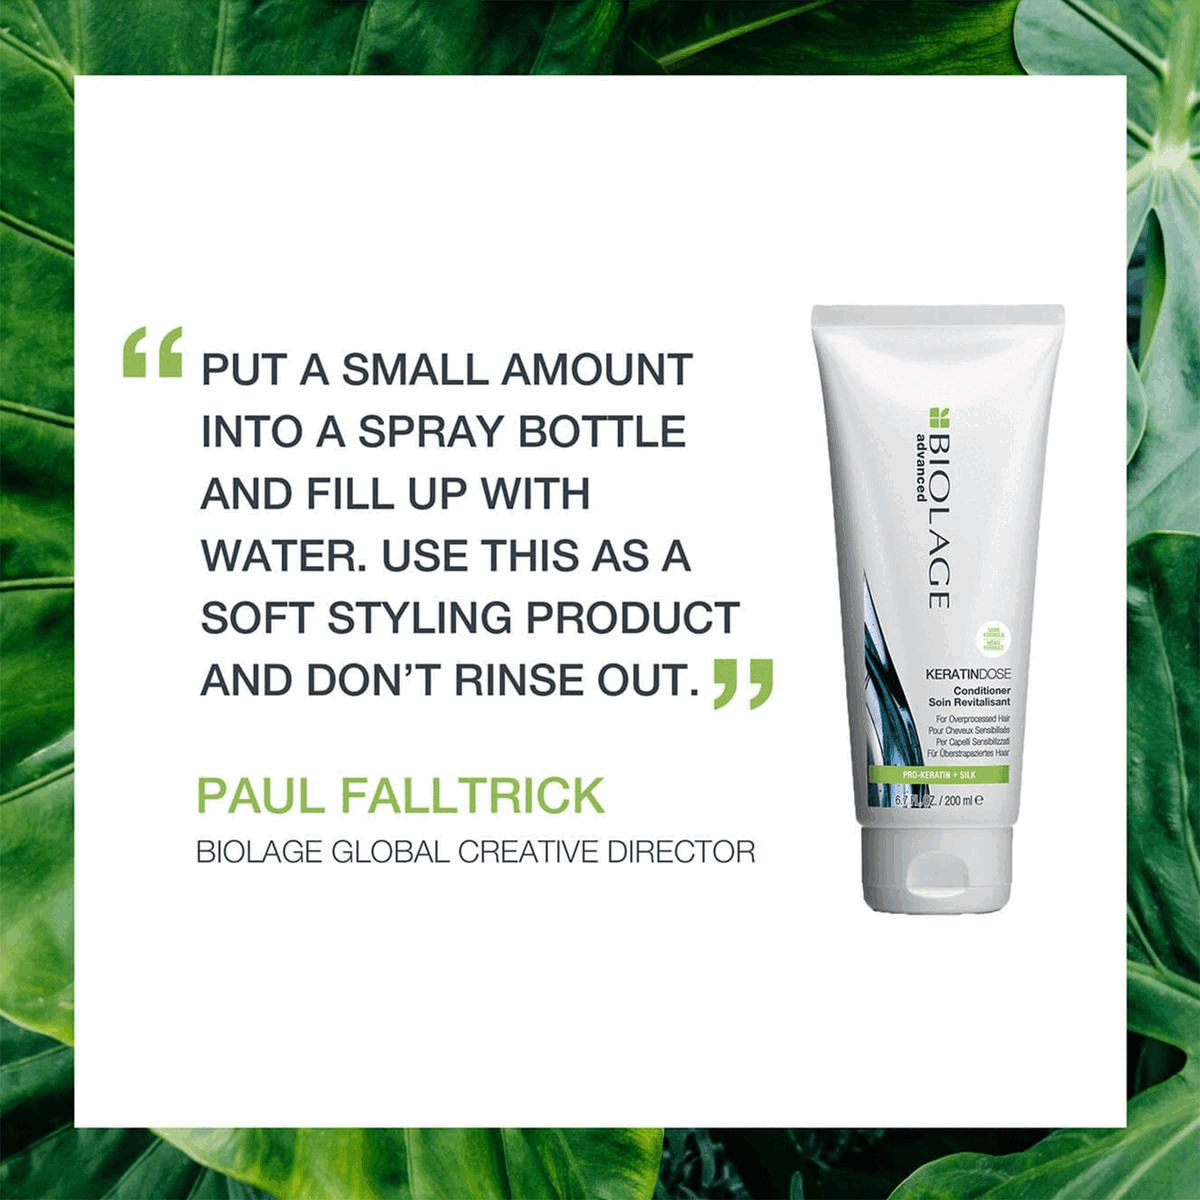 Paul Falltrick creative director advice on how to use the product.Build Your regimen